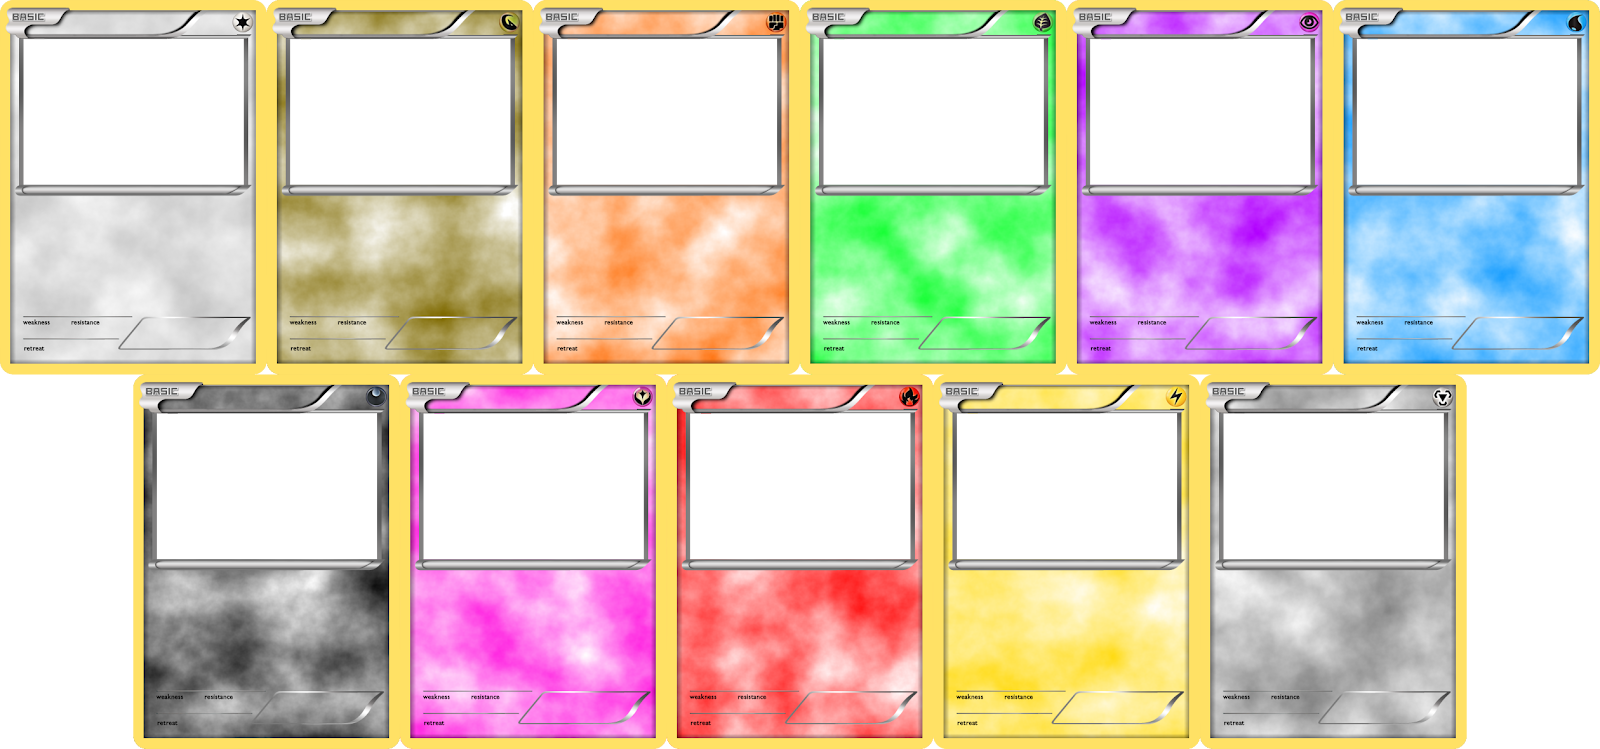 pokemon_blank_card_templates___basic_by_levelinfinitum-d7ukcth.png